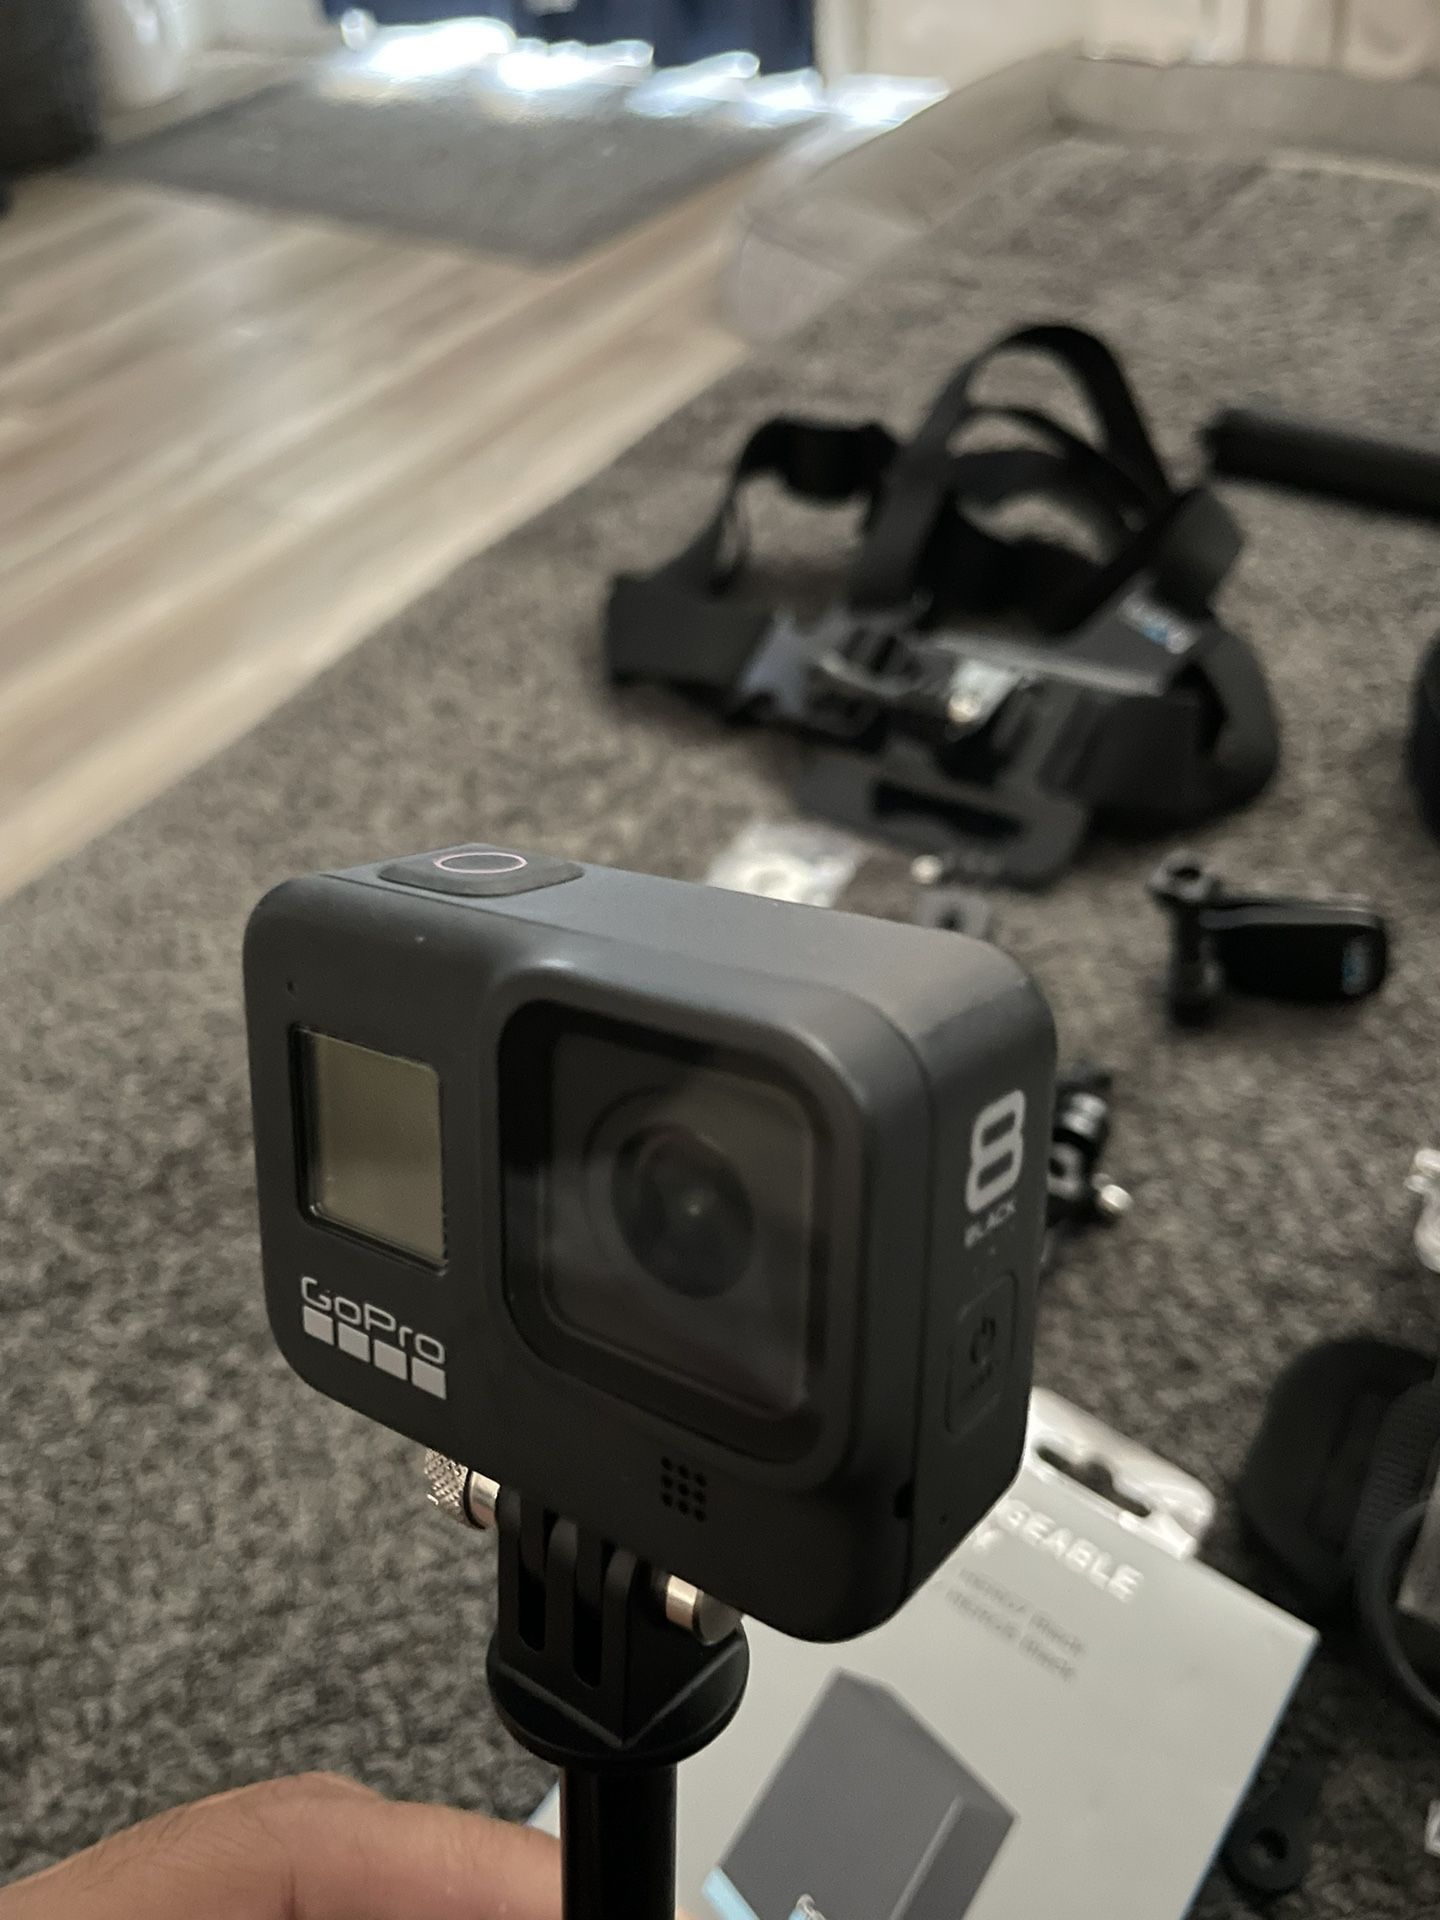 GoPro Cameras and Accessories (Everything Stays Together)